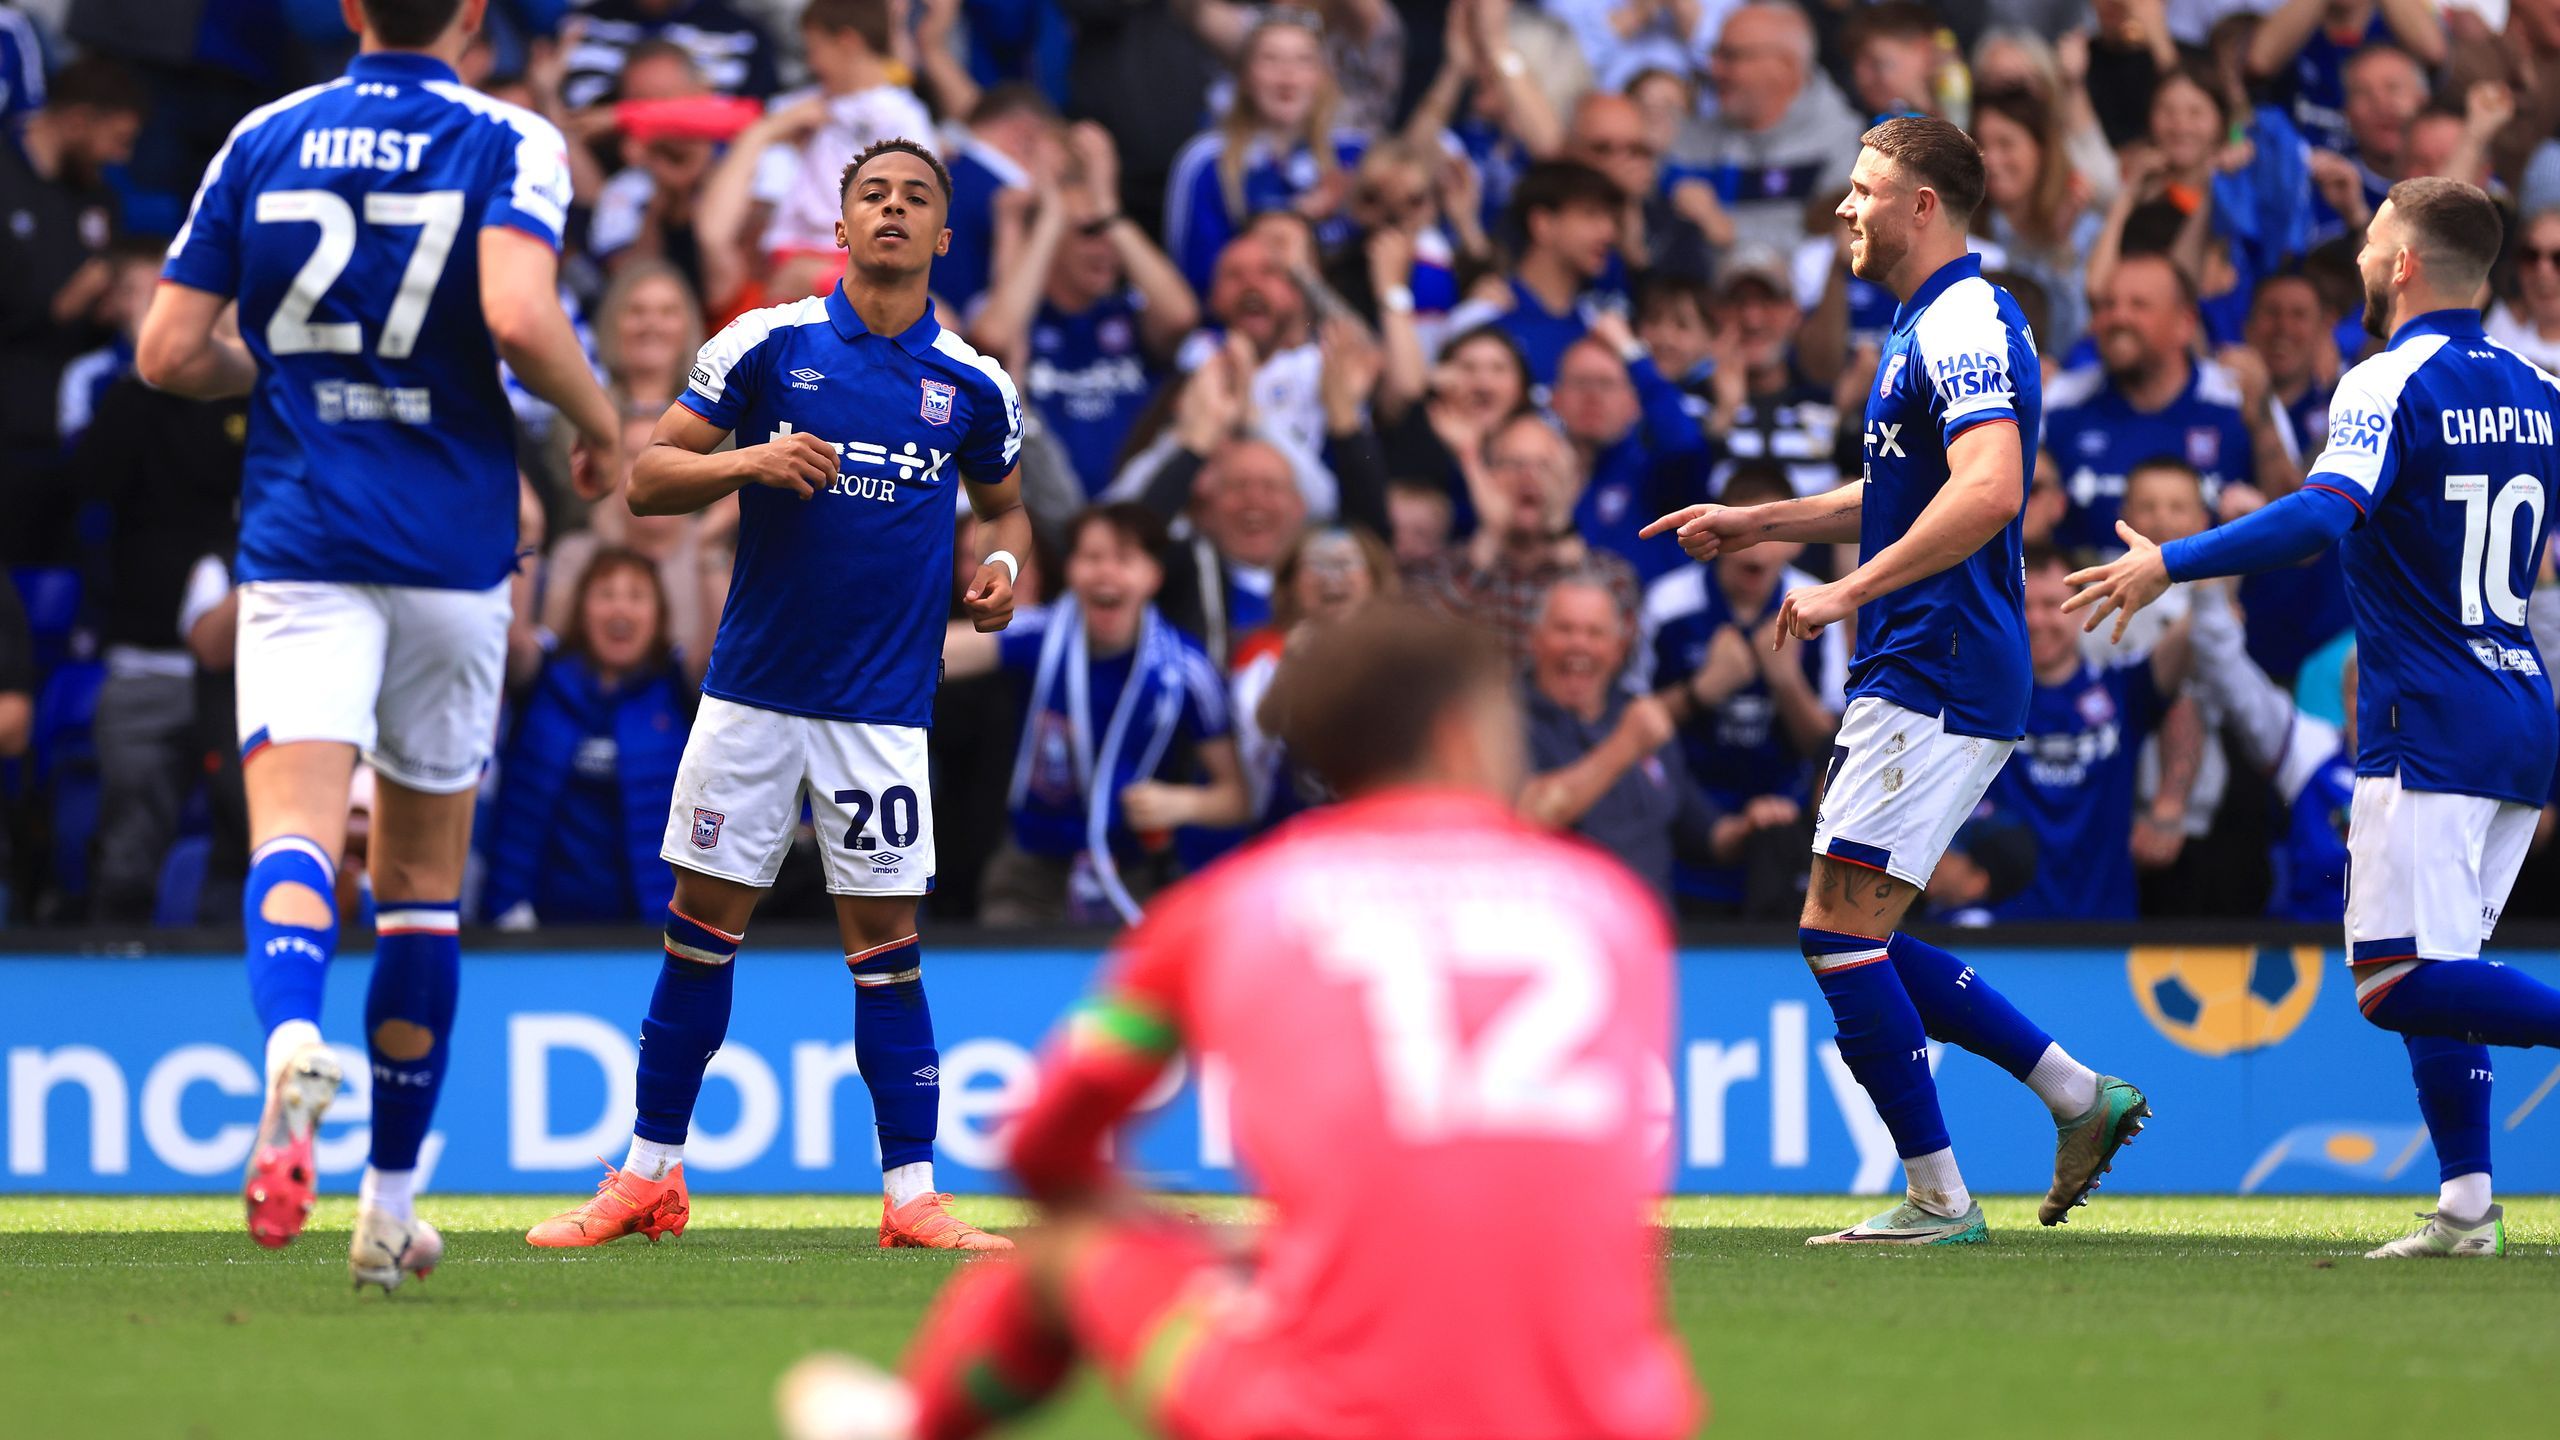 Ipswich back in the Premier League – promoted for the second consecutive season